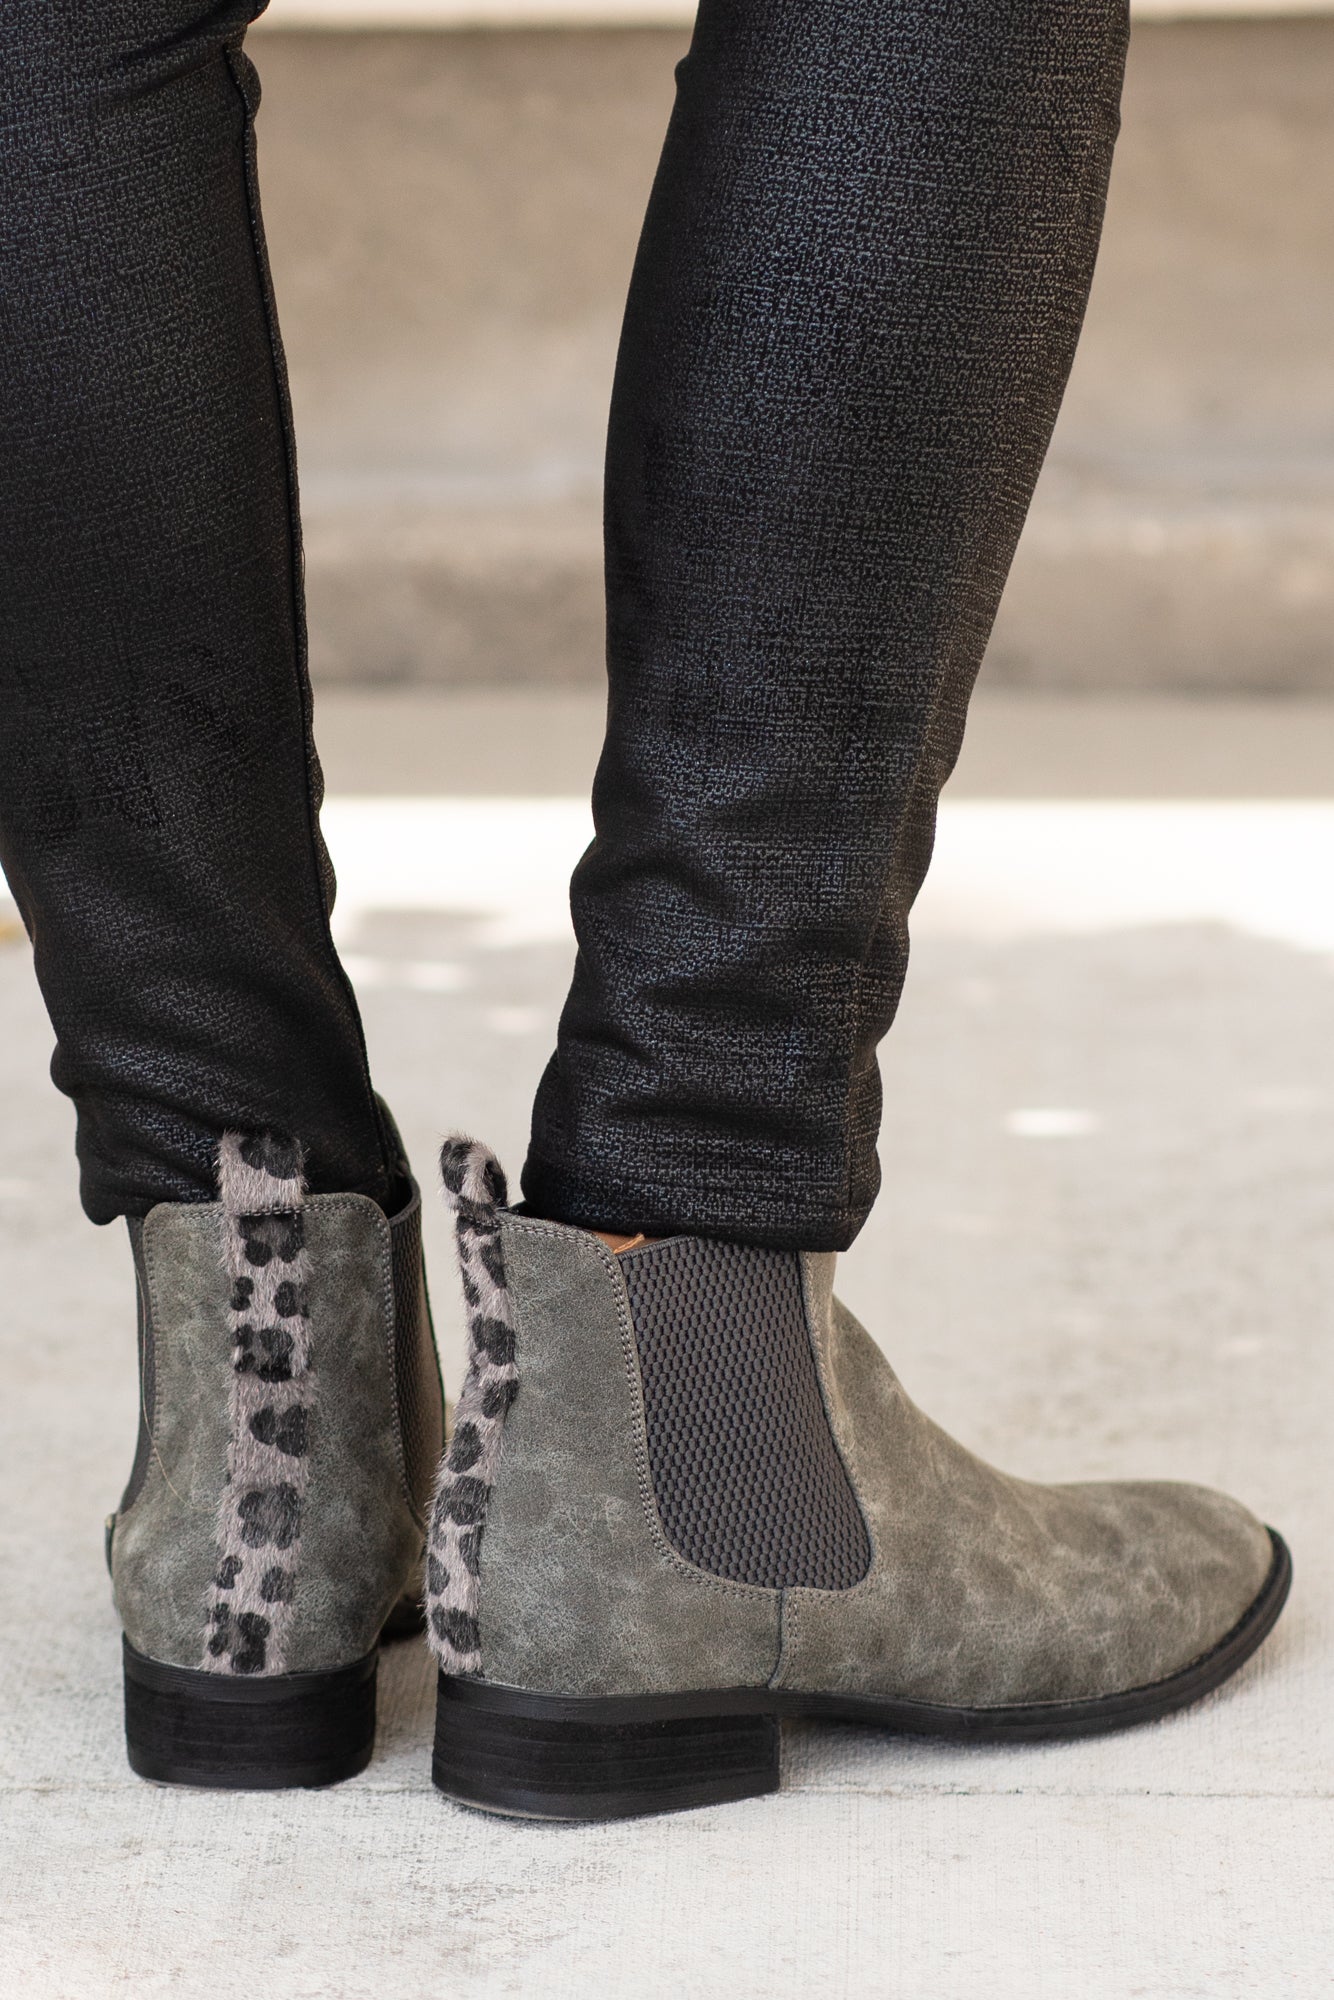 Booties | Very G  These booties from Very G are perfect to wear with your favorite jeans this is fall.  Style Name: Blake  Color: Grey Cut: Silp On Bootie   Rubber Sole Style #: VGLB0136-Grey Contact us for any additional measurements or sizing.